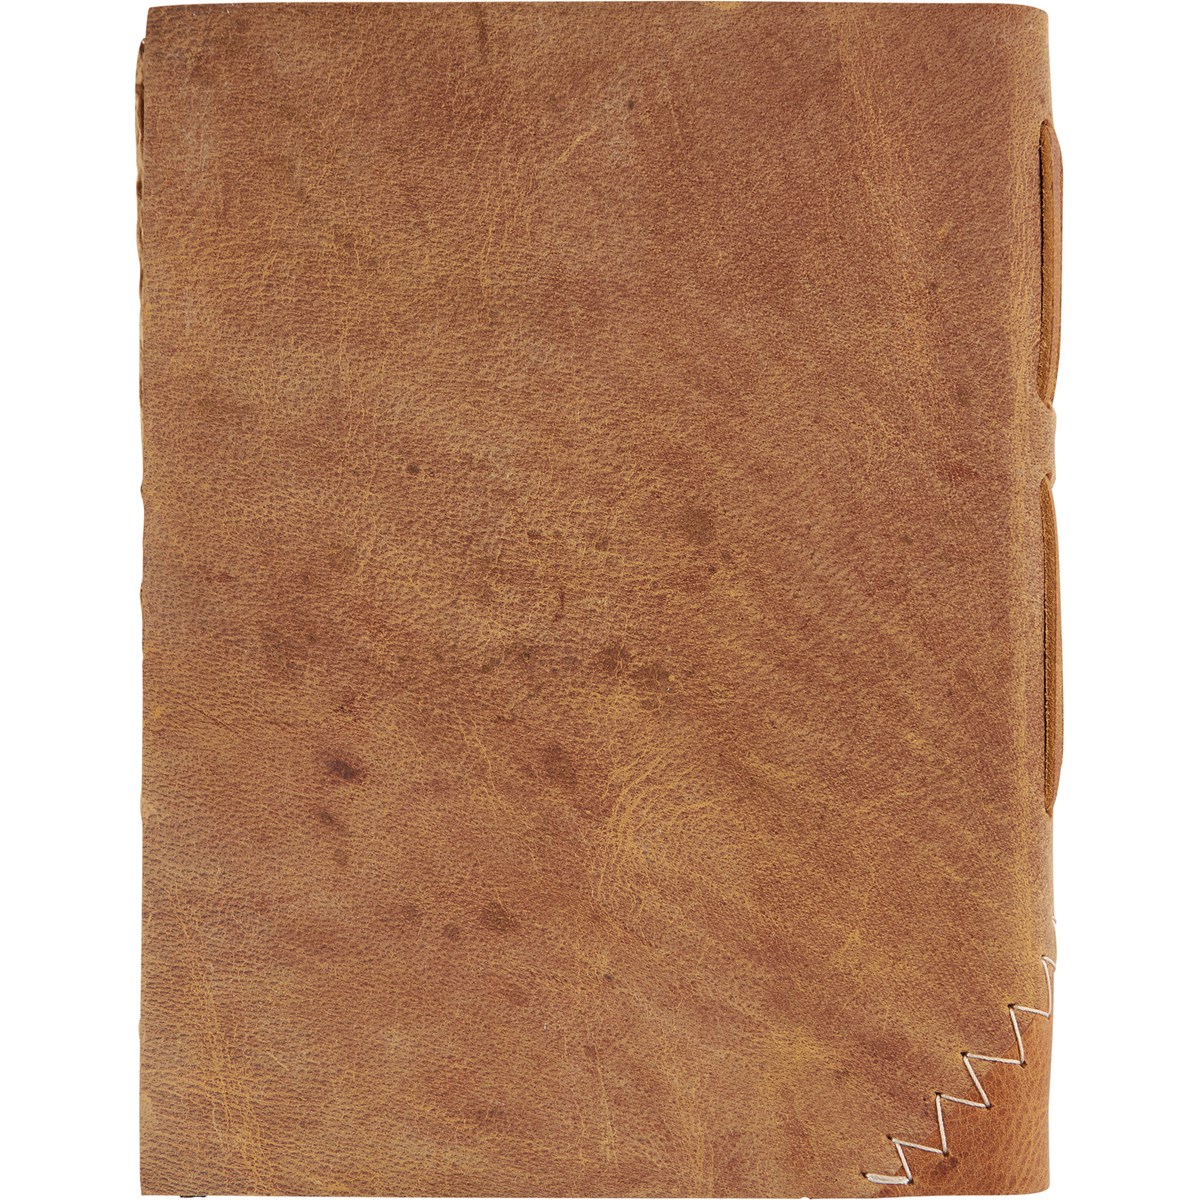 Leather Patchwork Journal - Leather, Paper